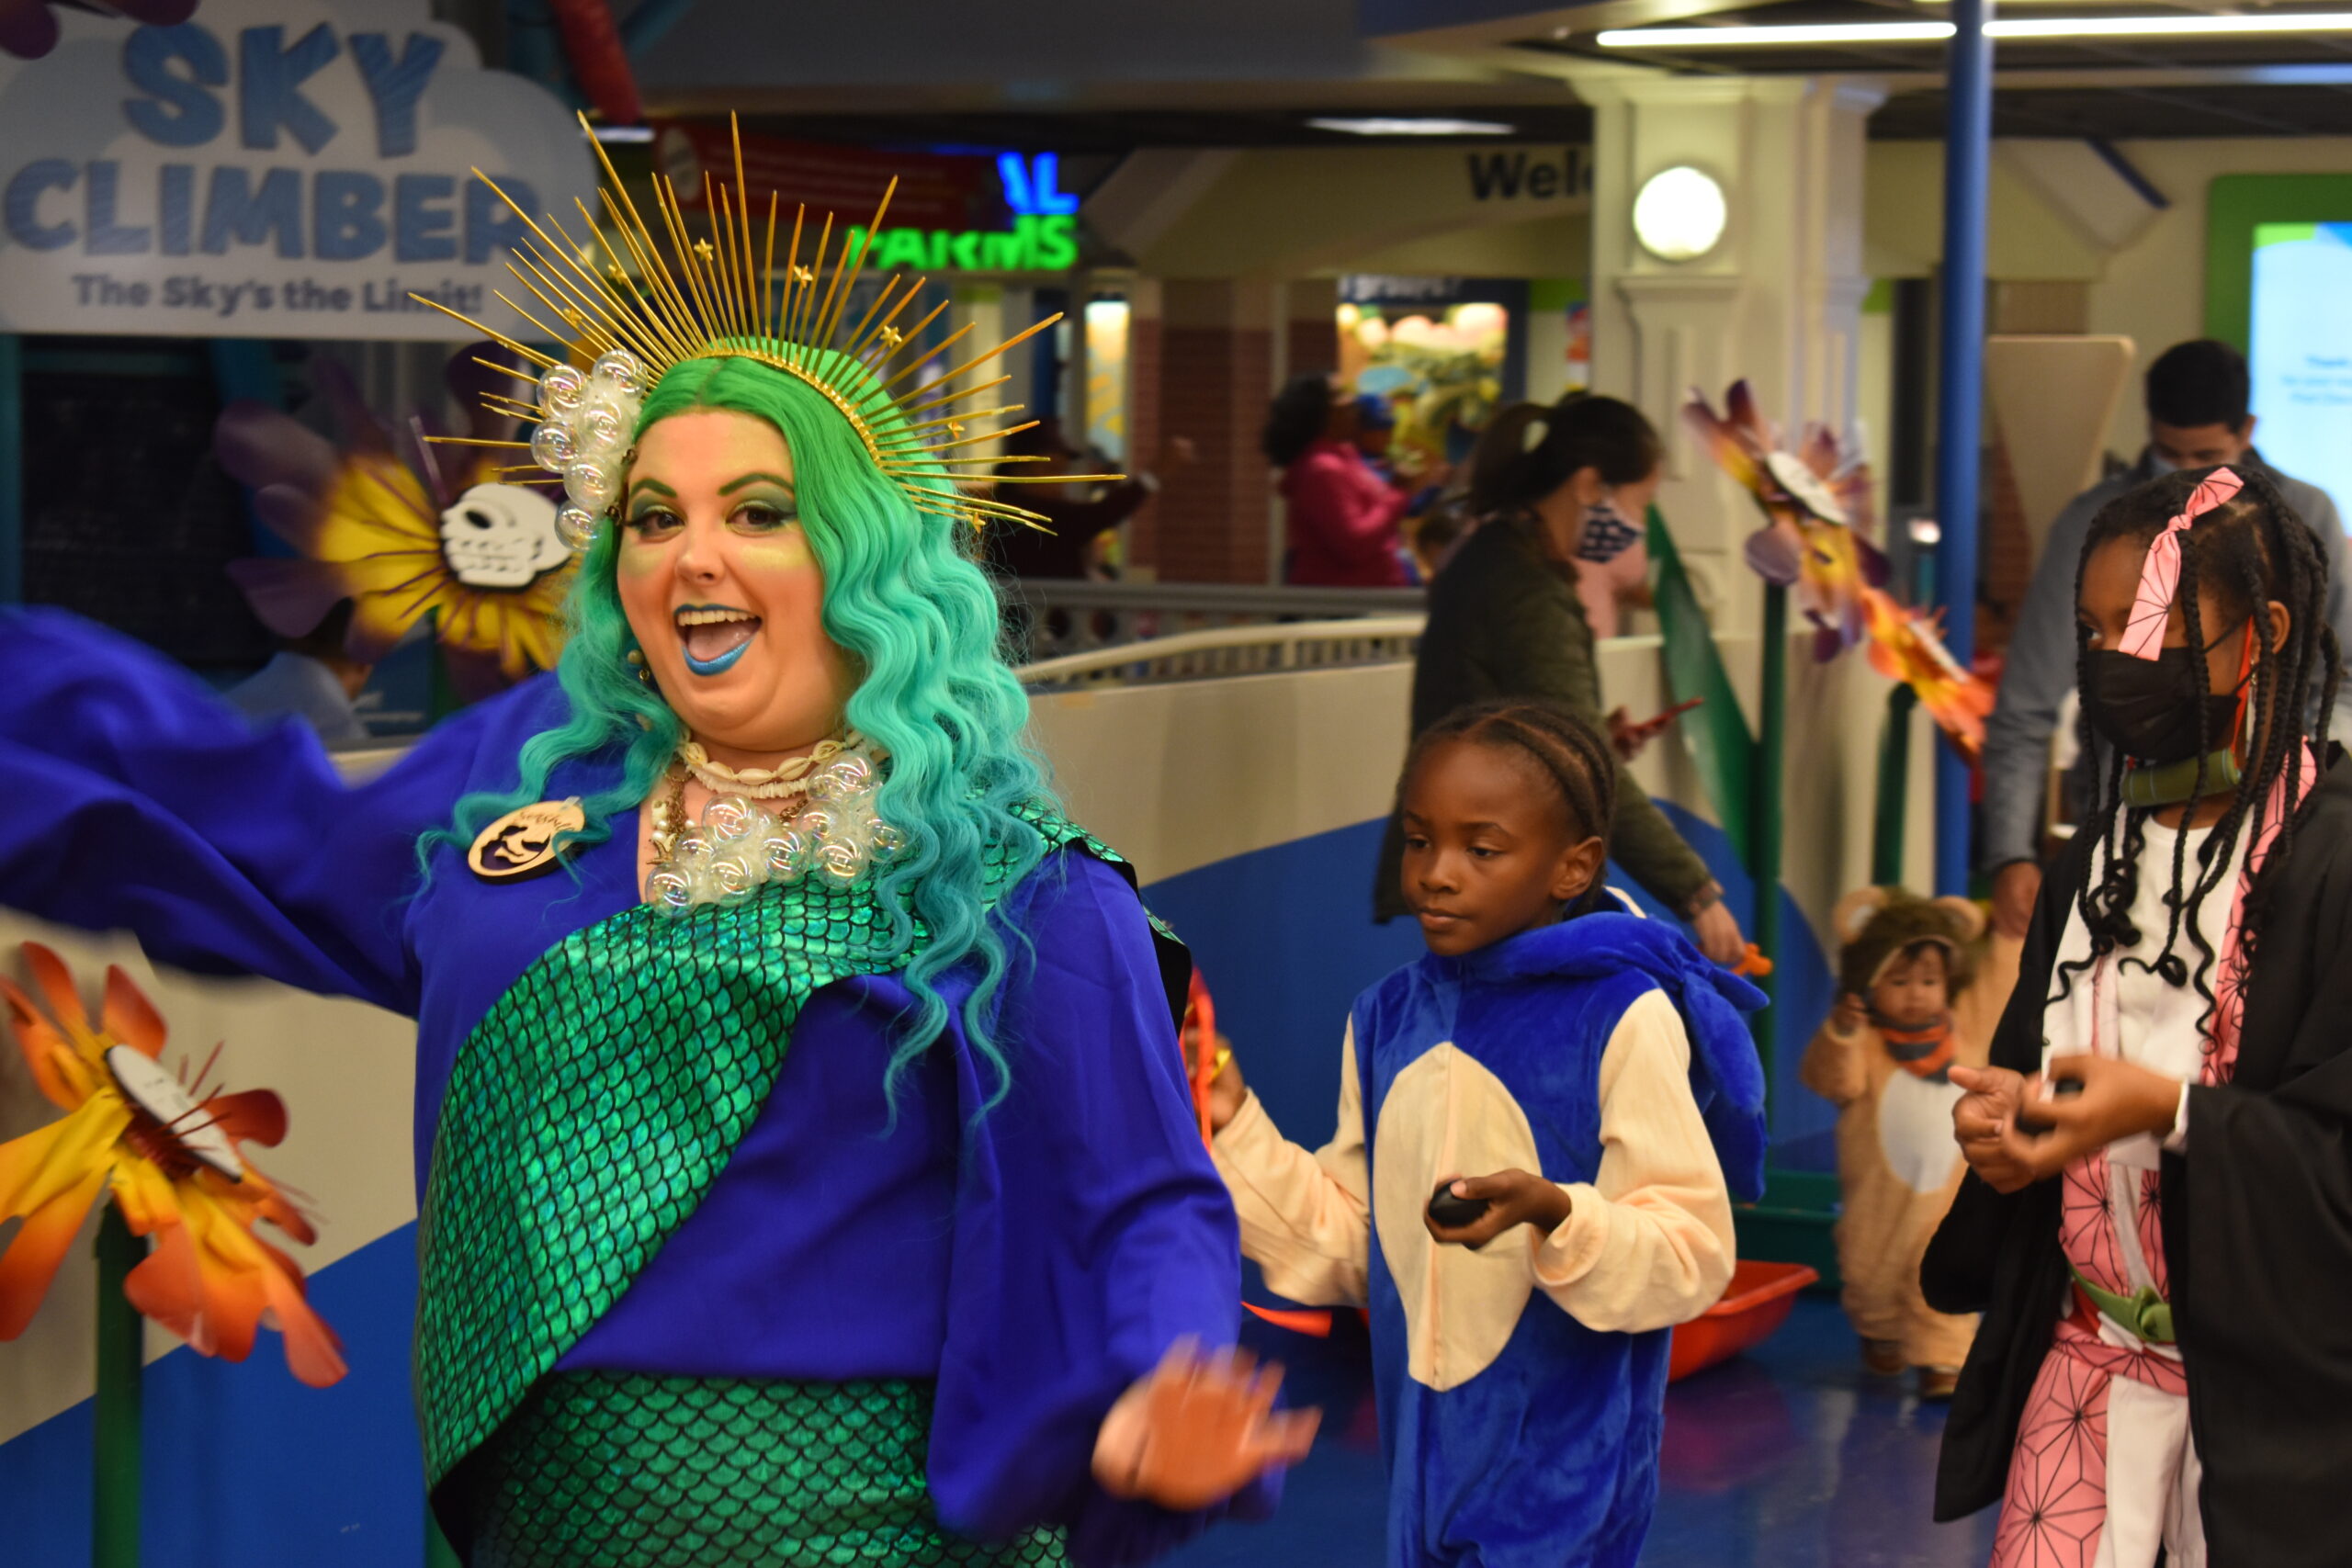 A special halloween costume parade led by a staff member dressed as a mermaid